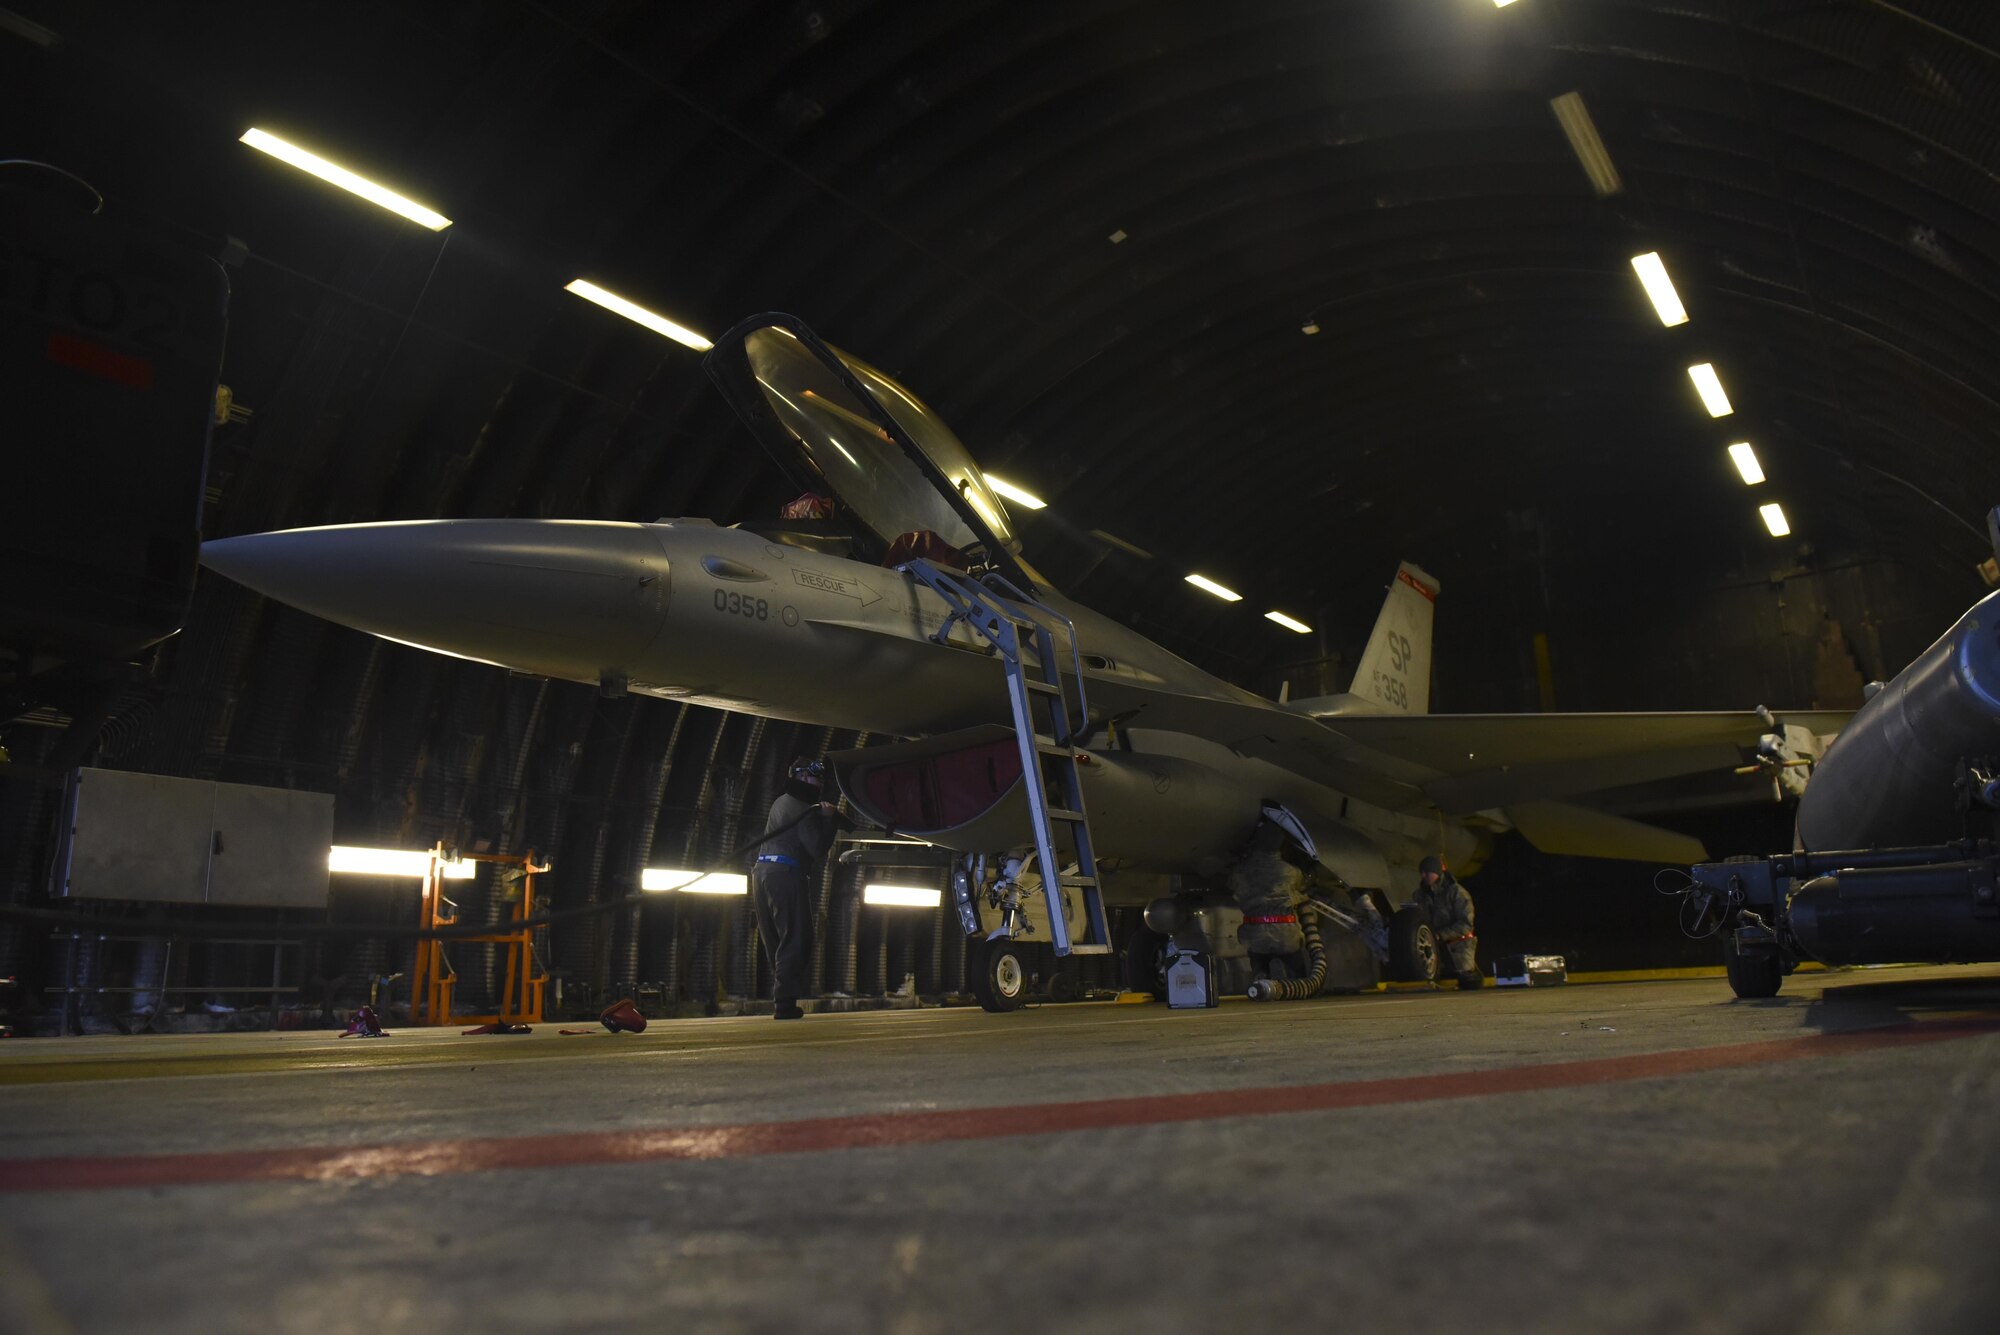 Airmen assigned to the 52nd Maintenance Group prepare an F-16 Fighting Falcon for the annual Combat Shield inspection at Spangdahlem Air Base, Germany, March 23, 2017. A Combat Shield team visited Spangdahlem March 20-24 to evaluate the reliability of several F-16s’ radar threat warning systems and countermeasures. (U.S. Air Force photo by Senior Airman Dawn M. Weber)